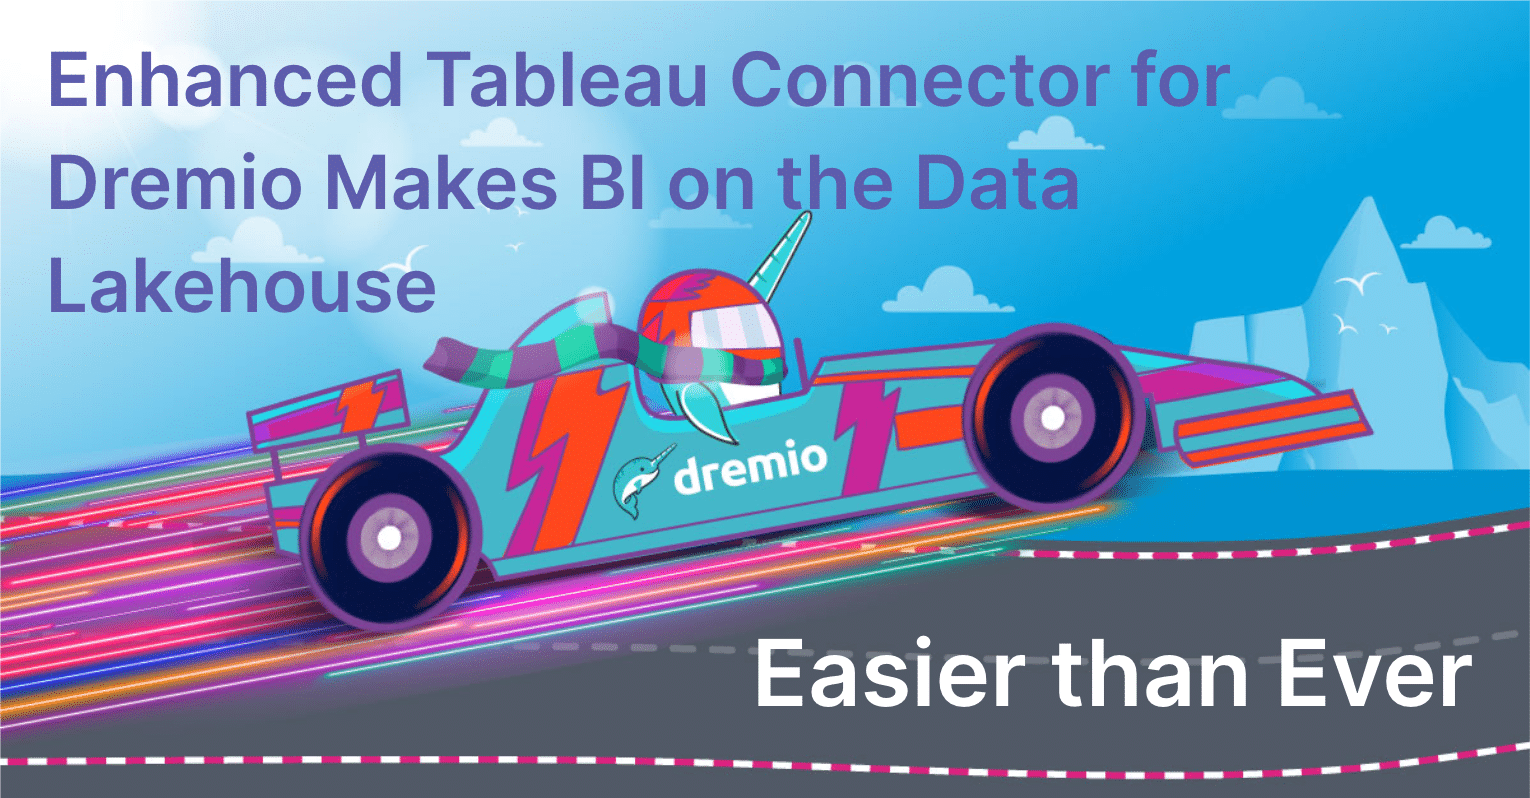 Enhanced Tableau Connector for Dremio Makes BI on the Data Lakehouse Easier than Ever